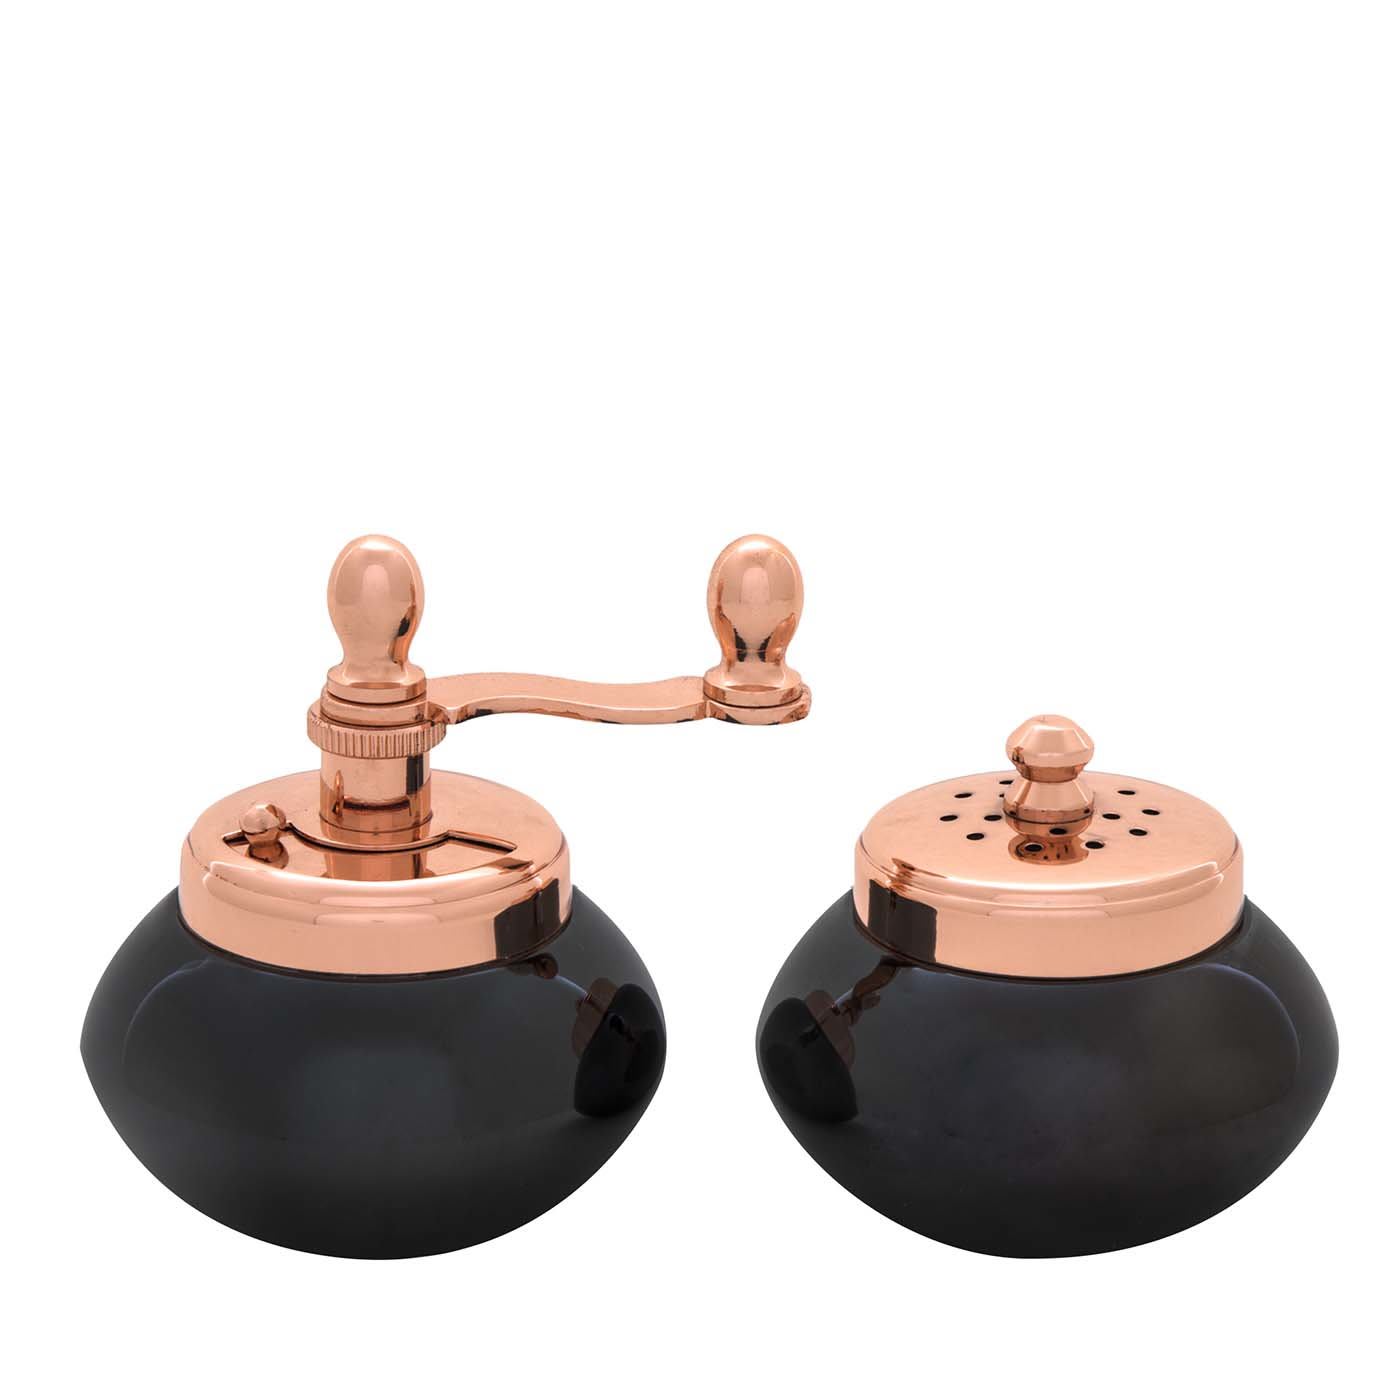 Black Nickel And Copper Plated Brass Pepper Mill And Salt Shaker - Chiarugi 1952